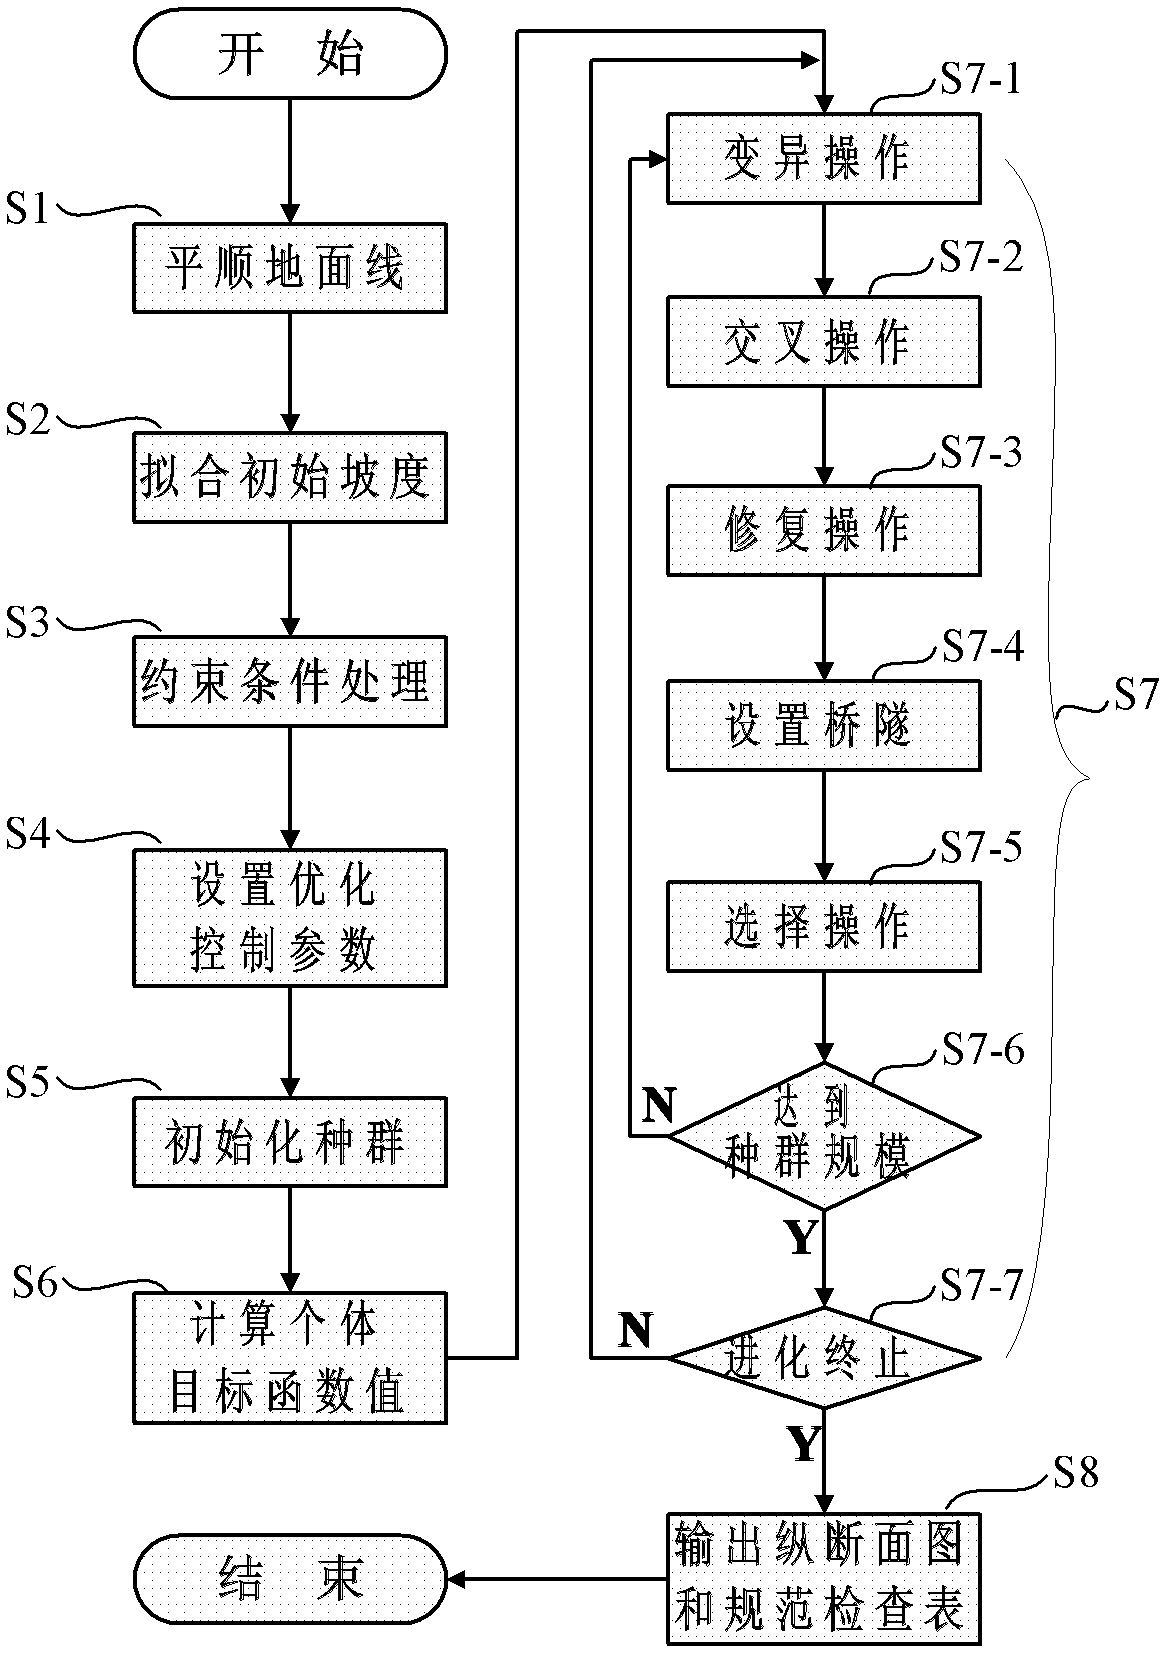 Method for automatically designing and optimizing railway vertical profile